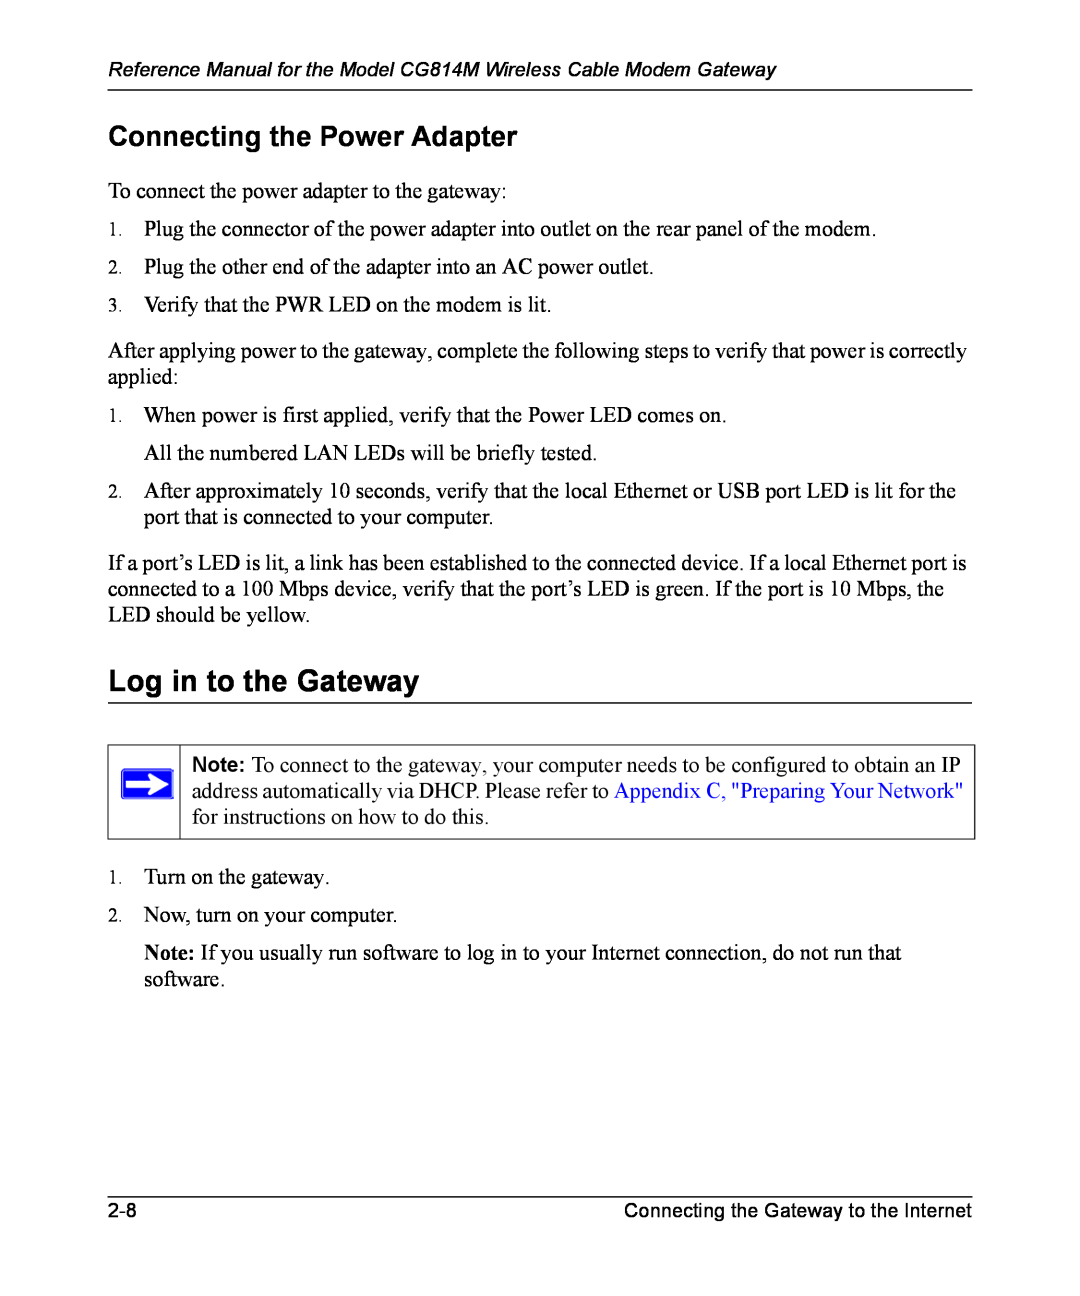 NETGEAR CG814M manual Log in to the Gateway, Connecting the Power Adapter 